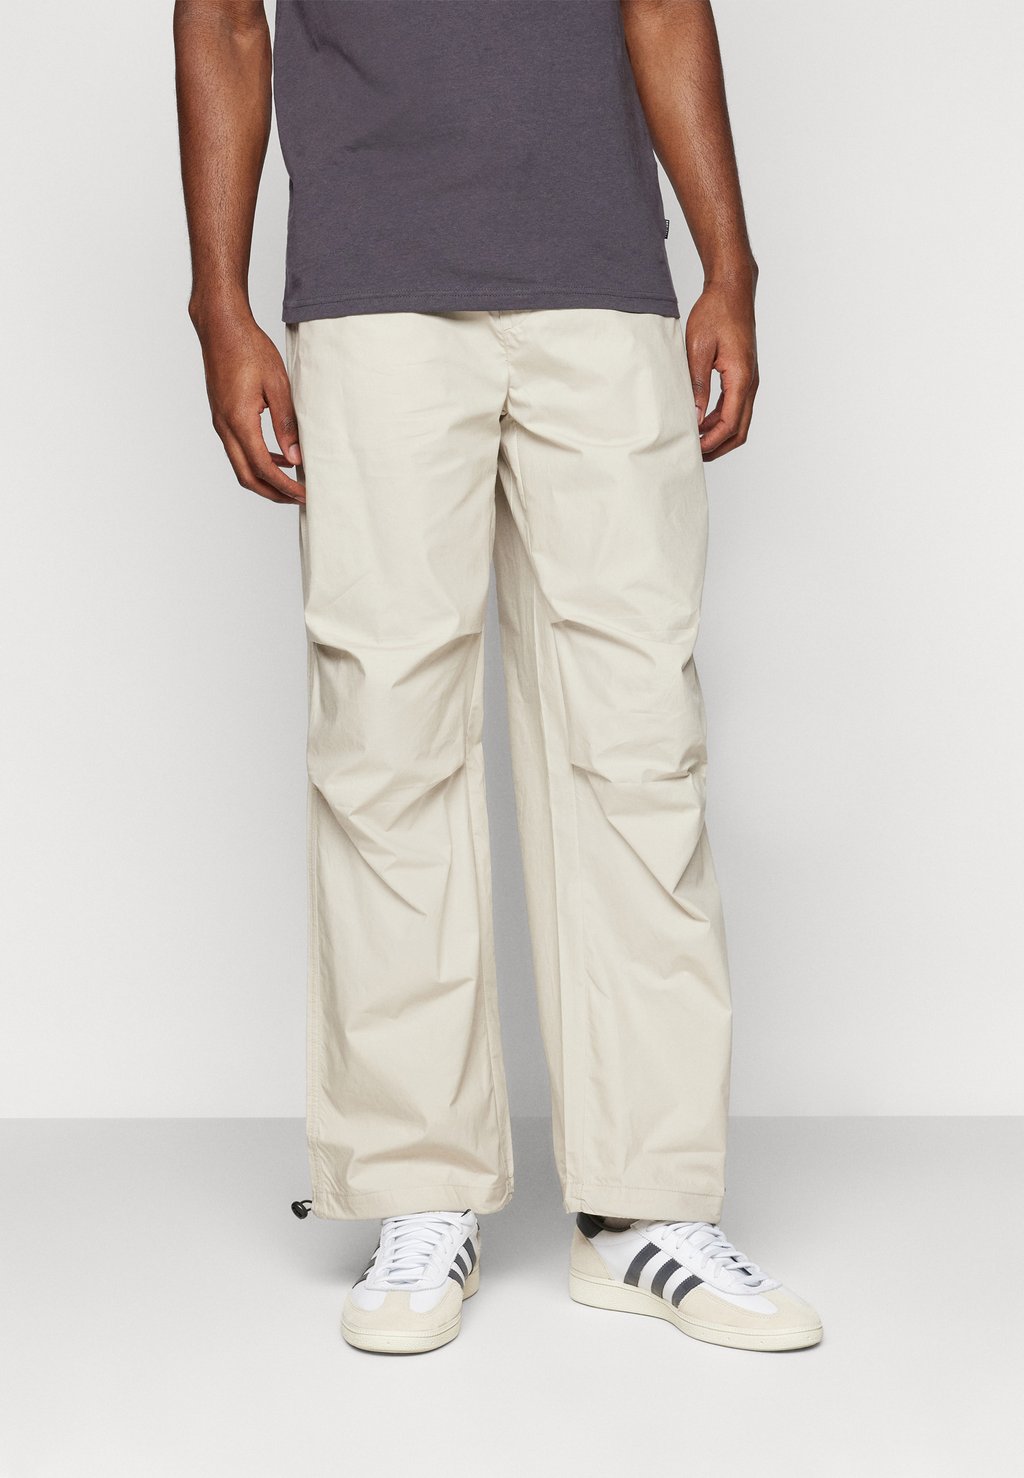 Брюки ONSFRED LOOSE PANT Only & Sons, цвет silver lining брюки onsfred loose pant only